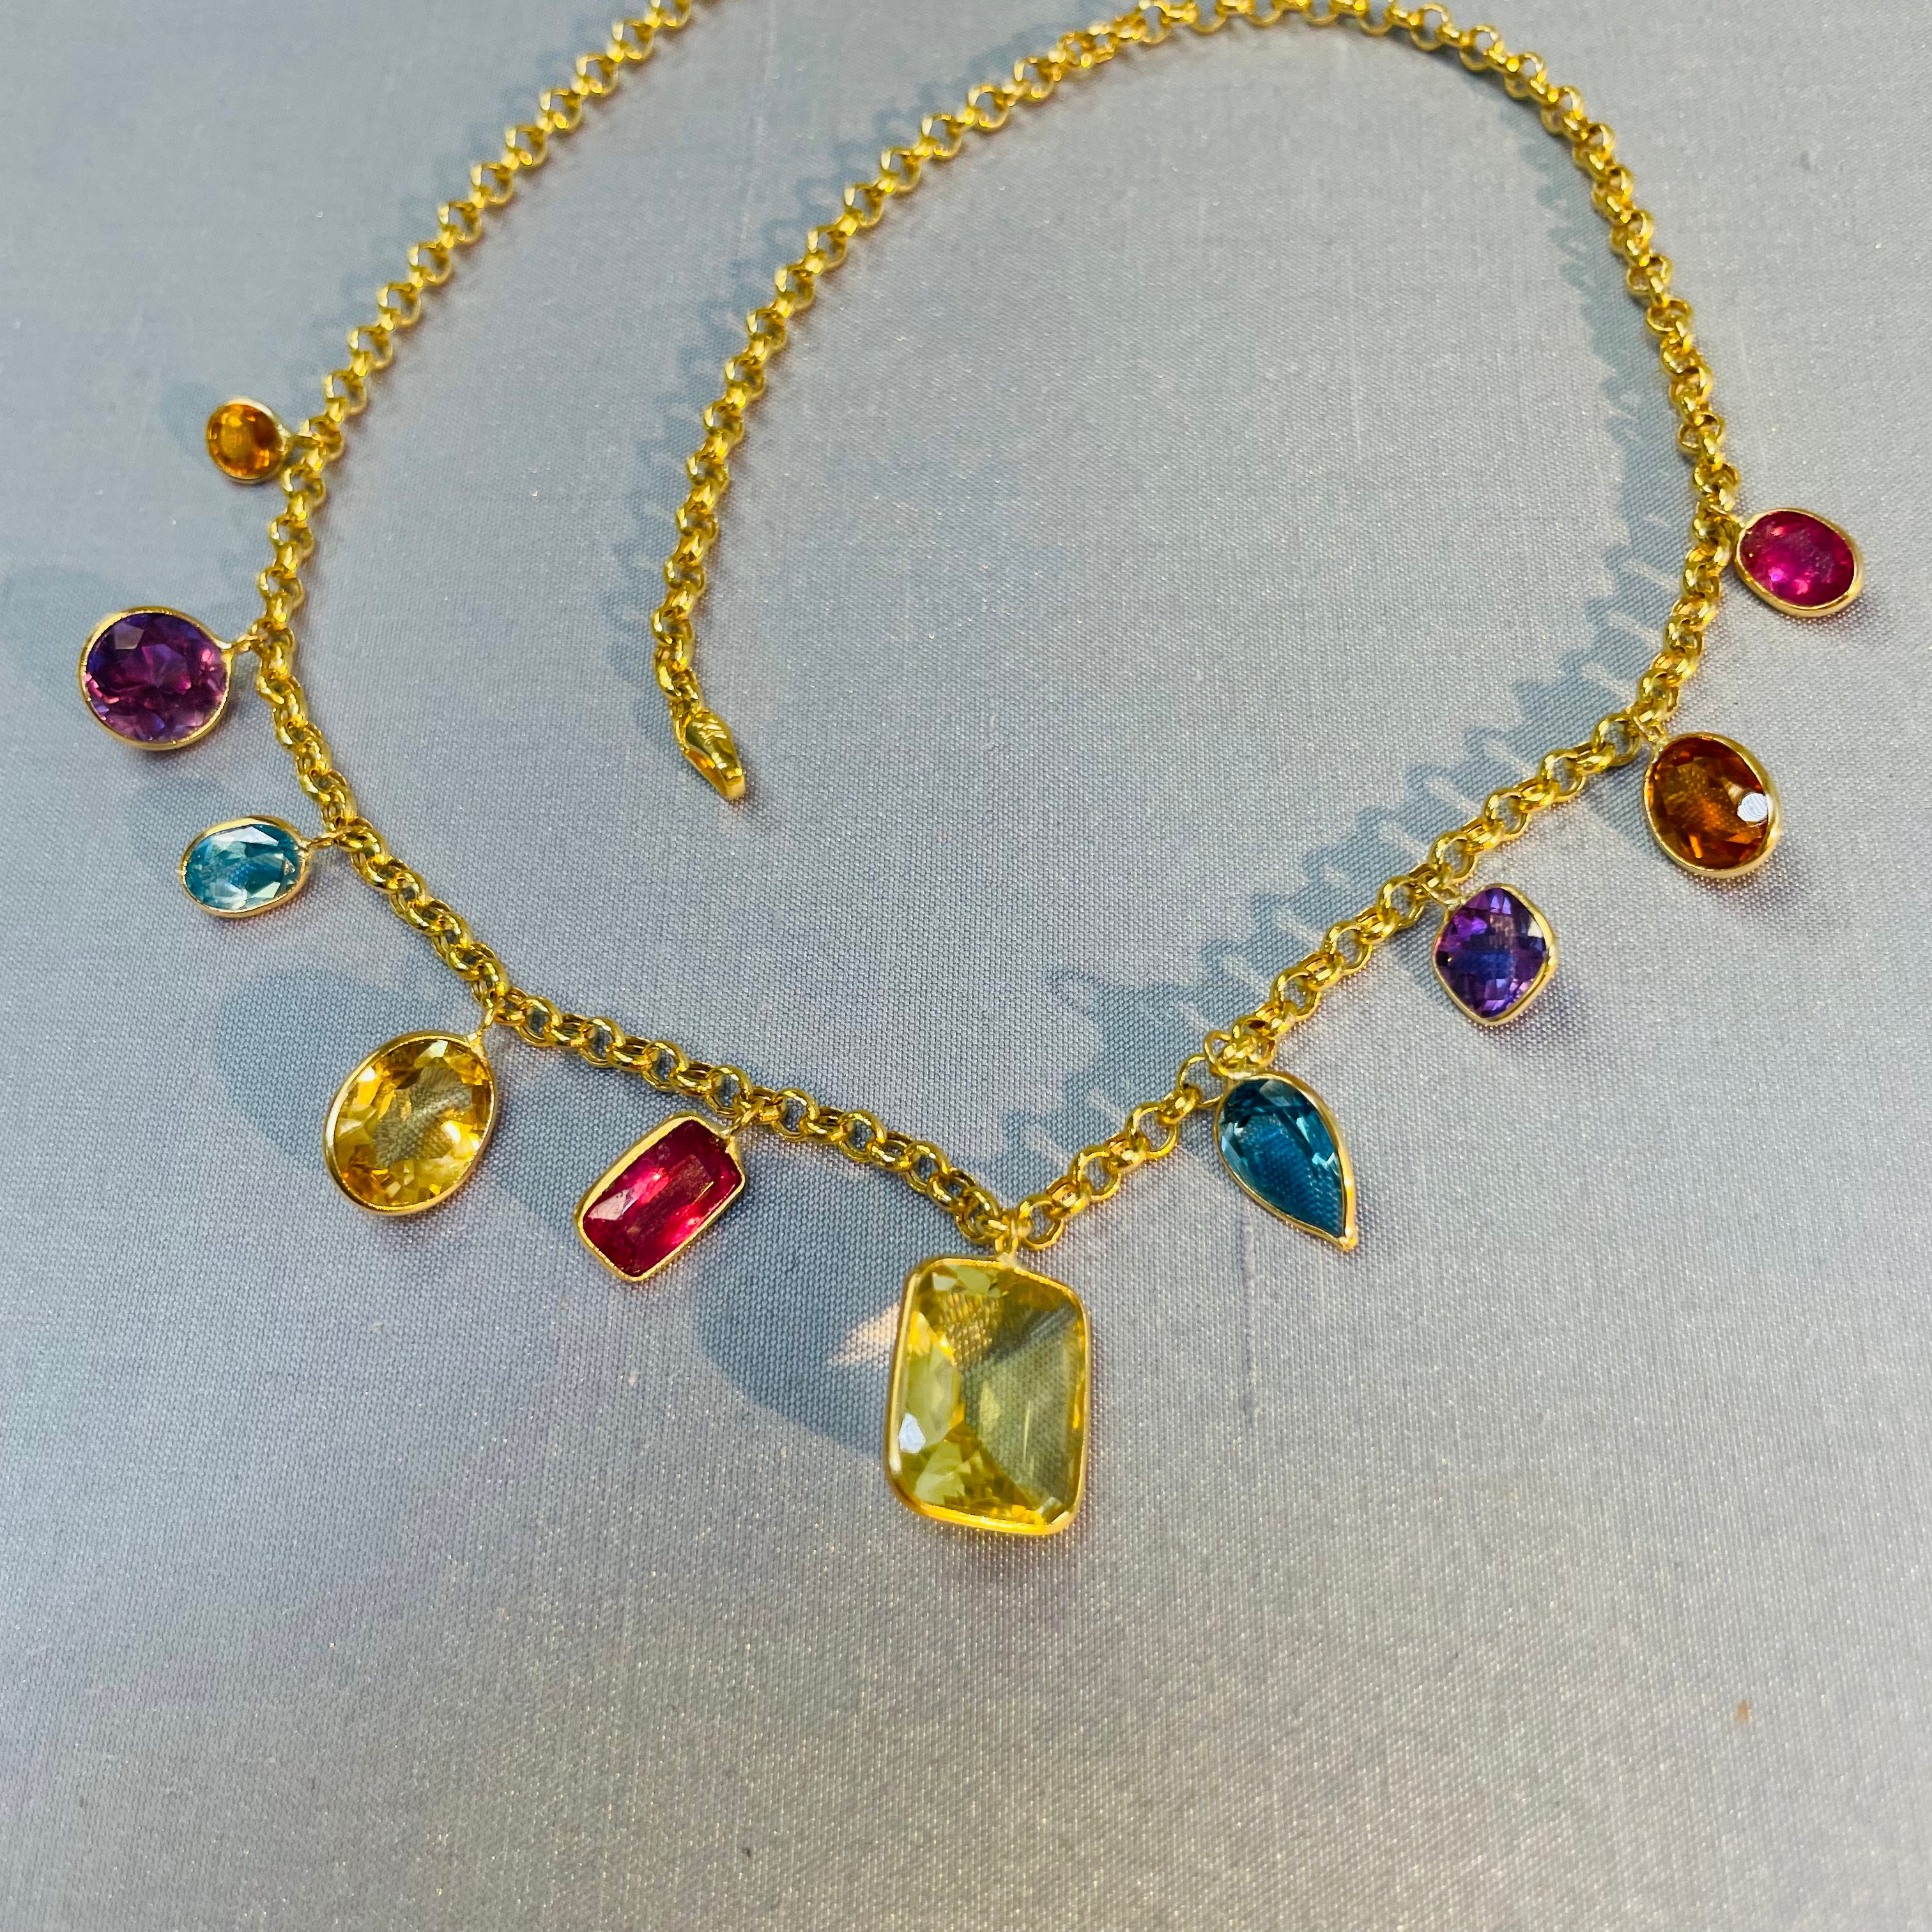 Bright and Colorful! Solid 14K Yellow Gold Gem Charm Necklace with Pink Tourmaline Topaz Citrine Aquamarine, and Amethyst Custom